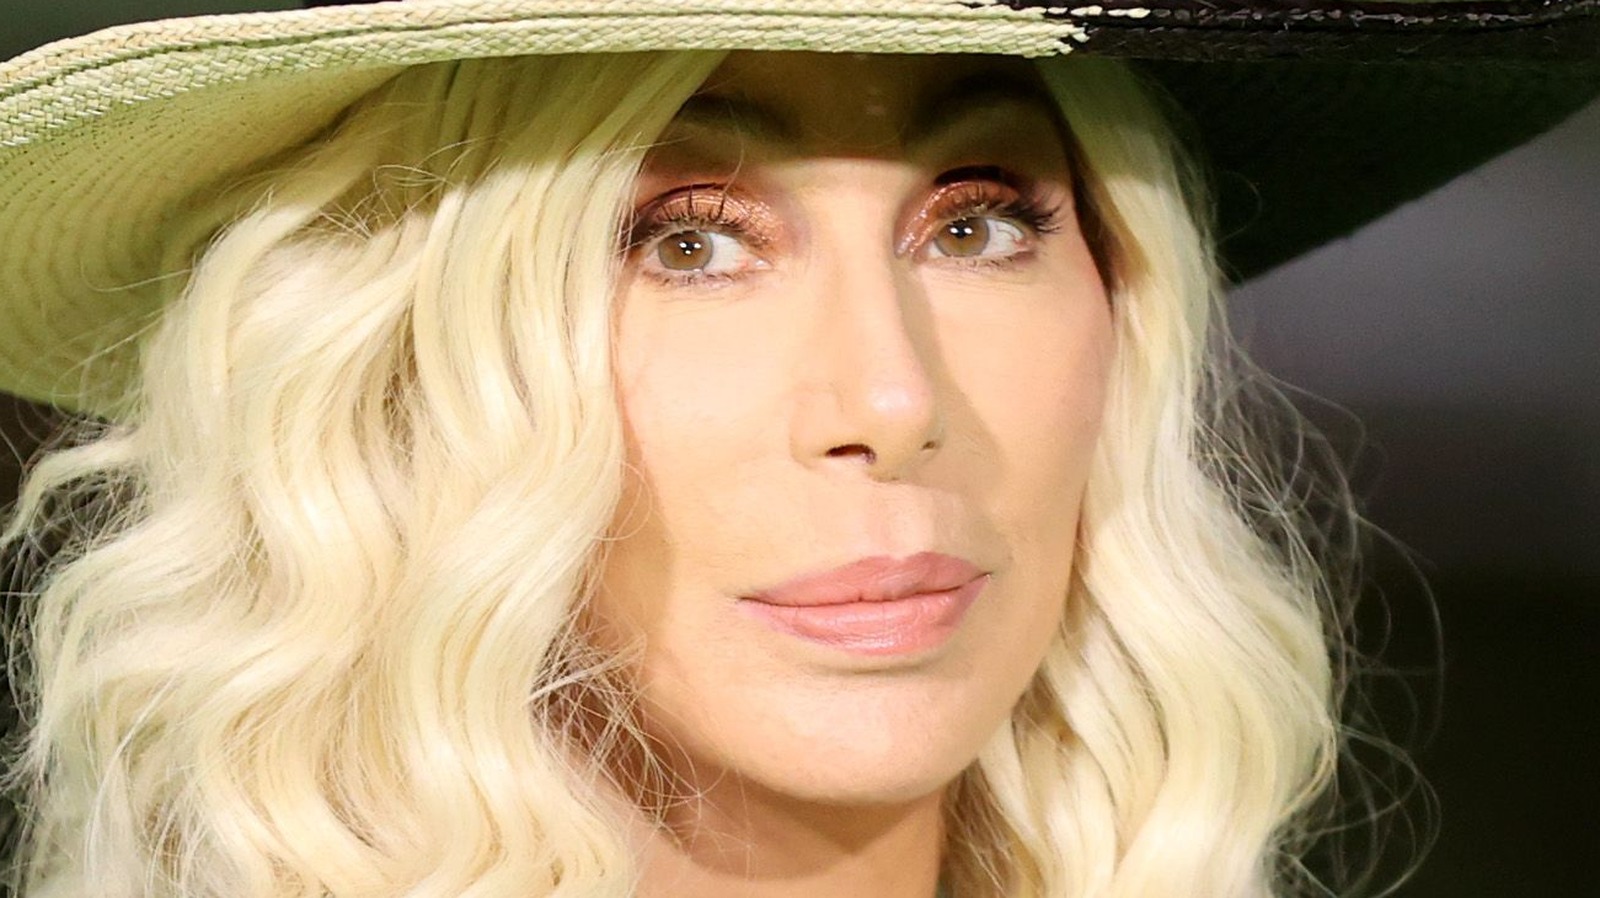 Cher Opens the Emotional Floodgates when Cher is Asked About Her Well Being